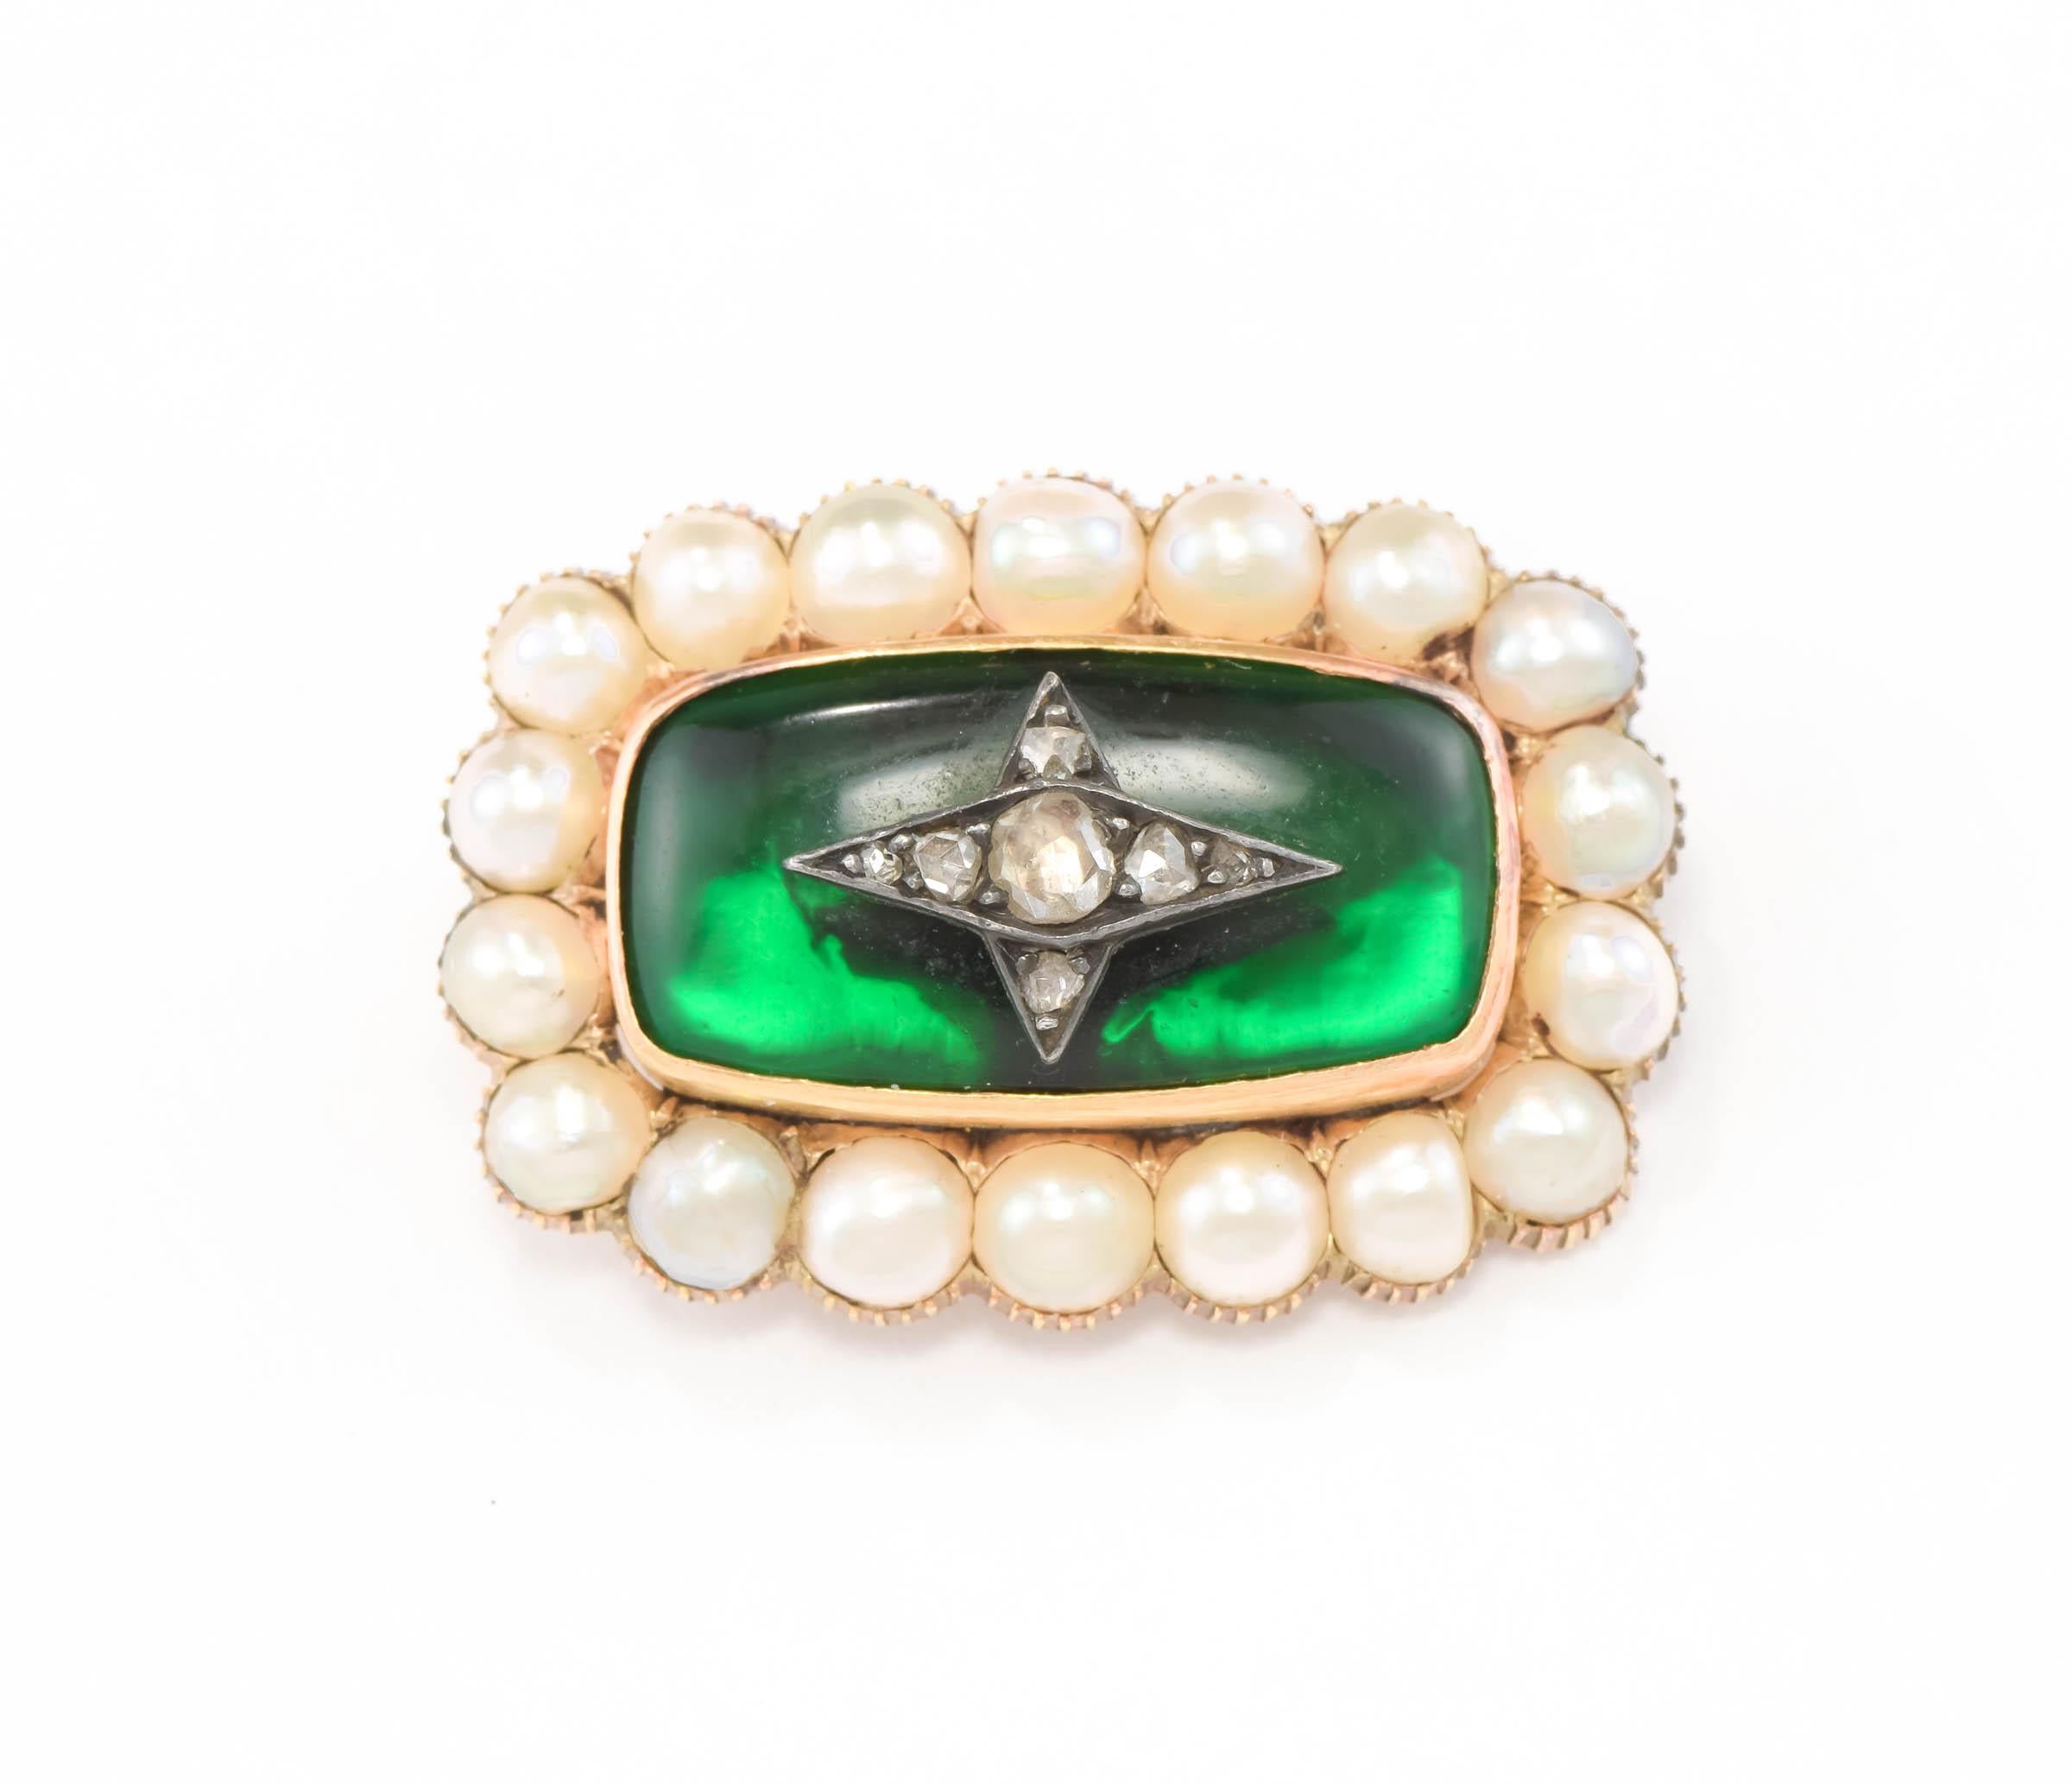 Antique Diamond Star Brooch Pin with Glowing Green & Pearls - or Convert to Ring For Sale